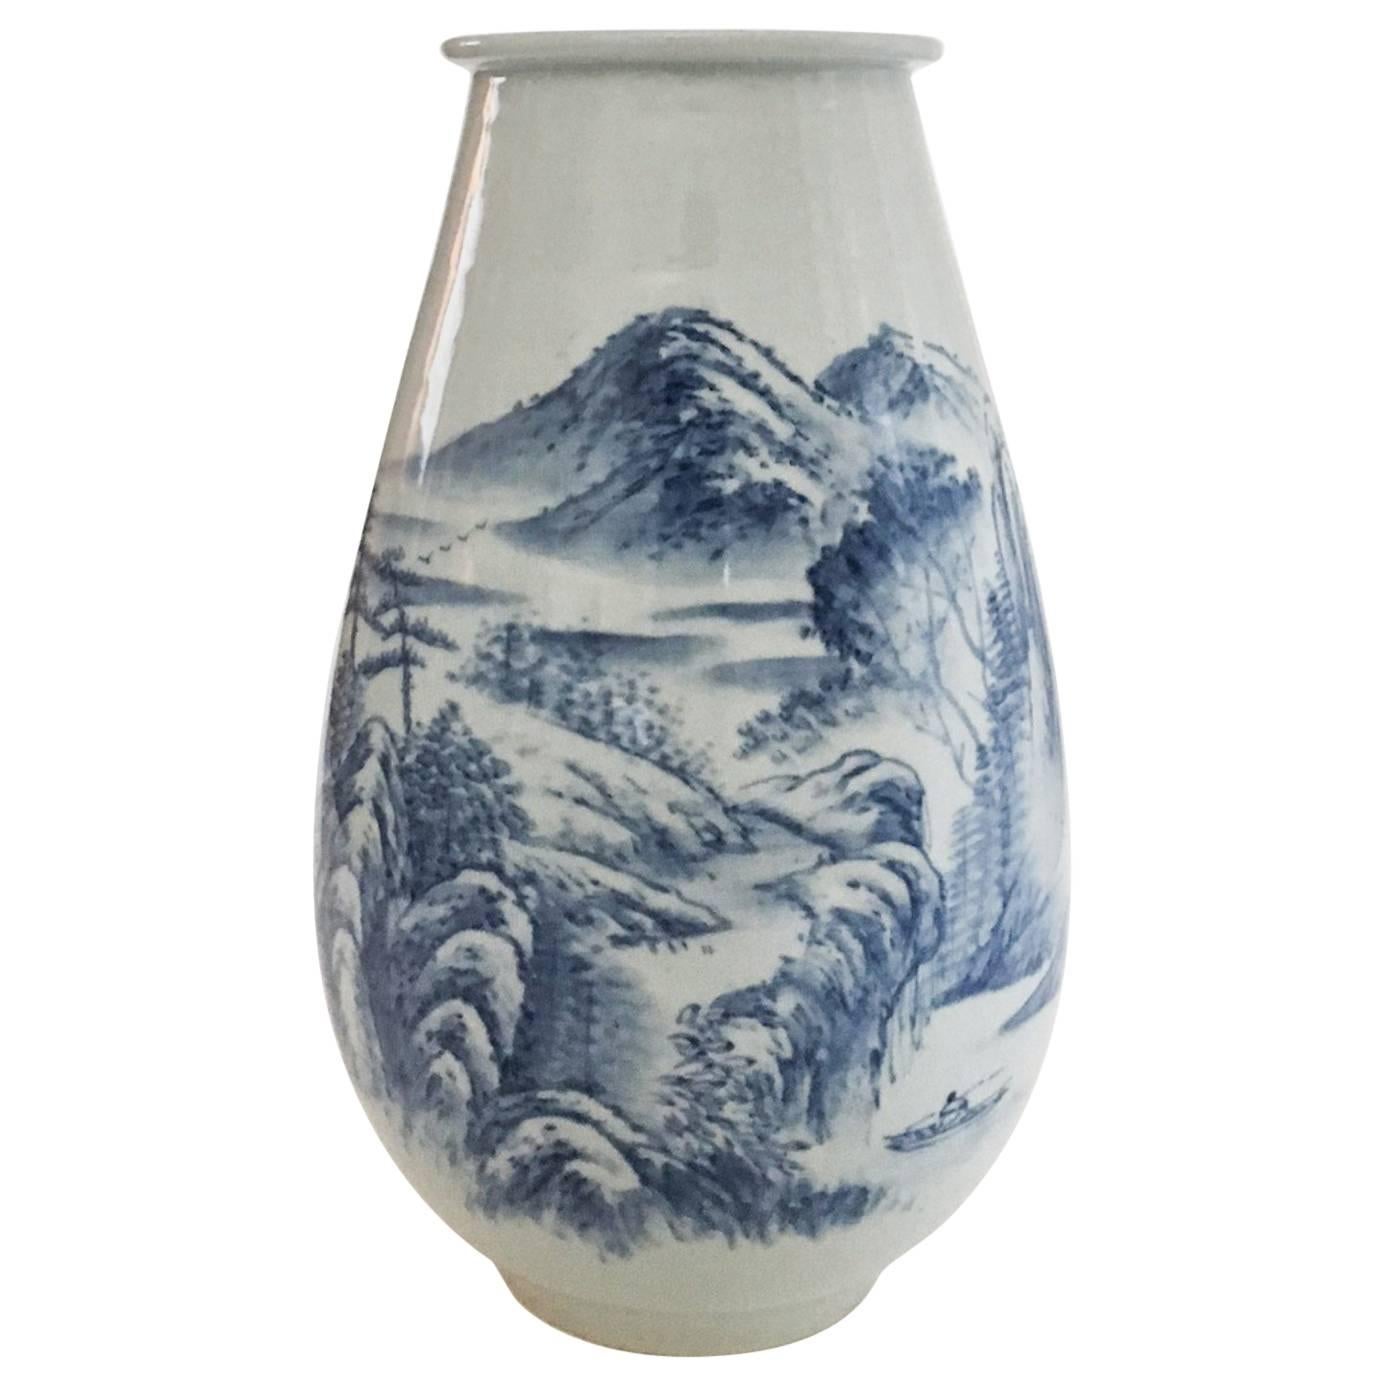 Antique Mountain Scene Hand-Painted Chinese Vase